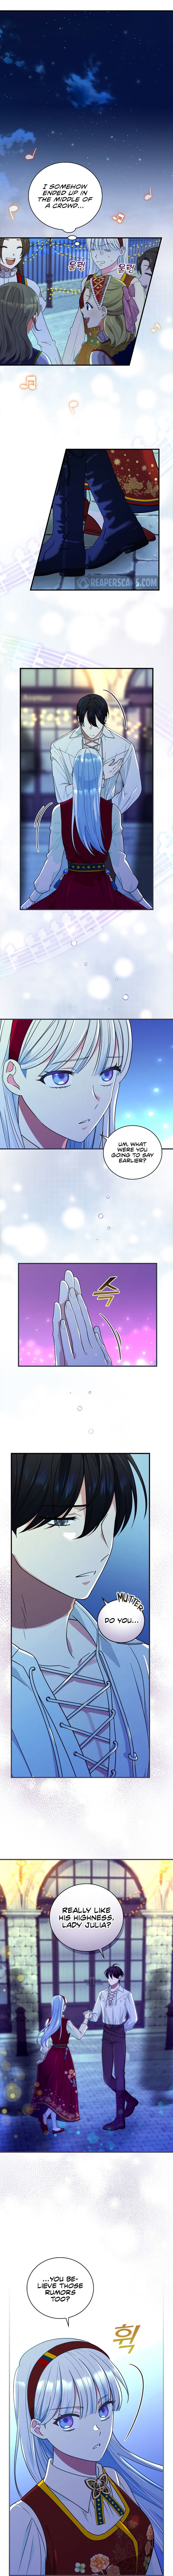 Knight of the Frozen Flower Chapter 45 page 11 - MangaWeebs.in